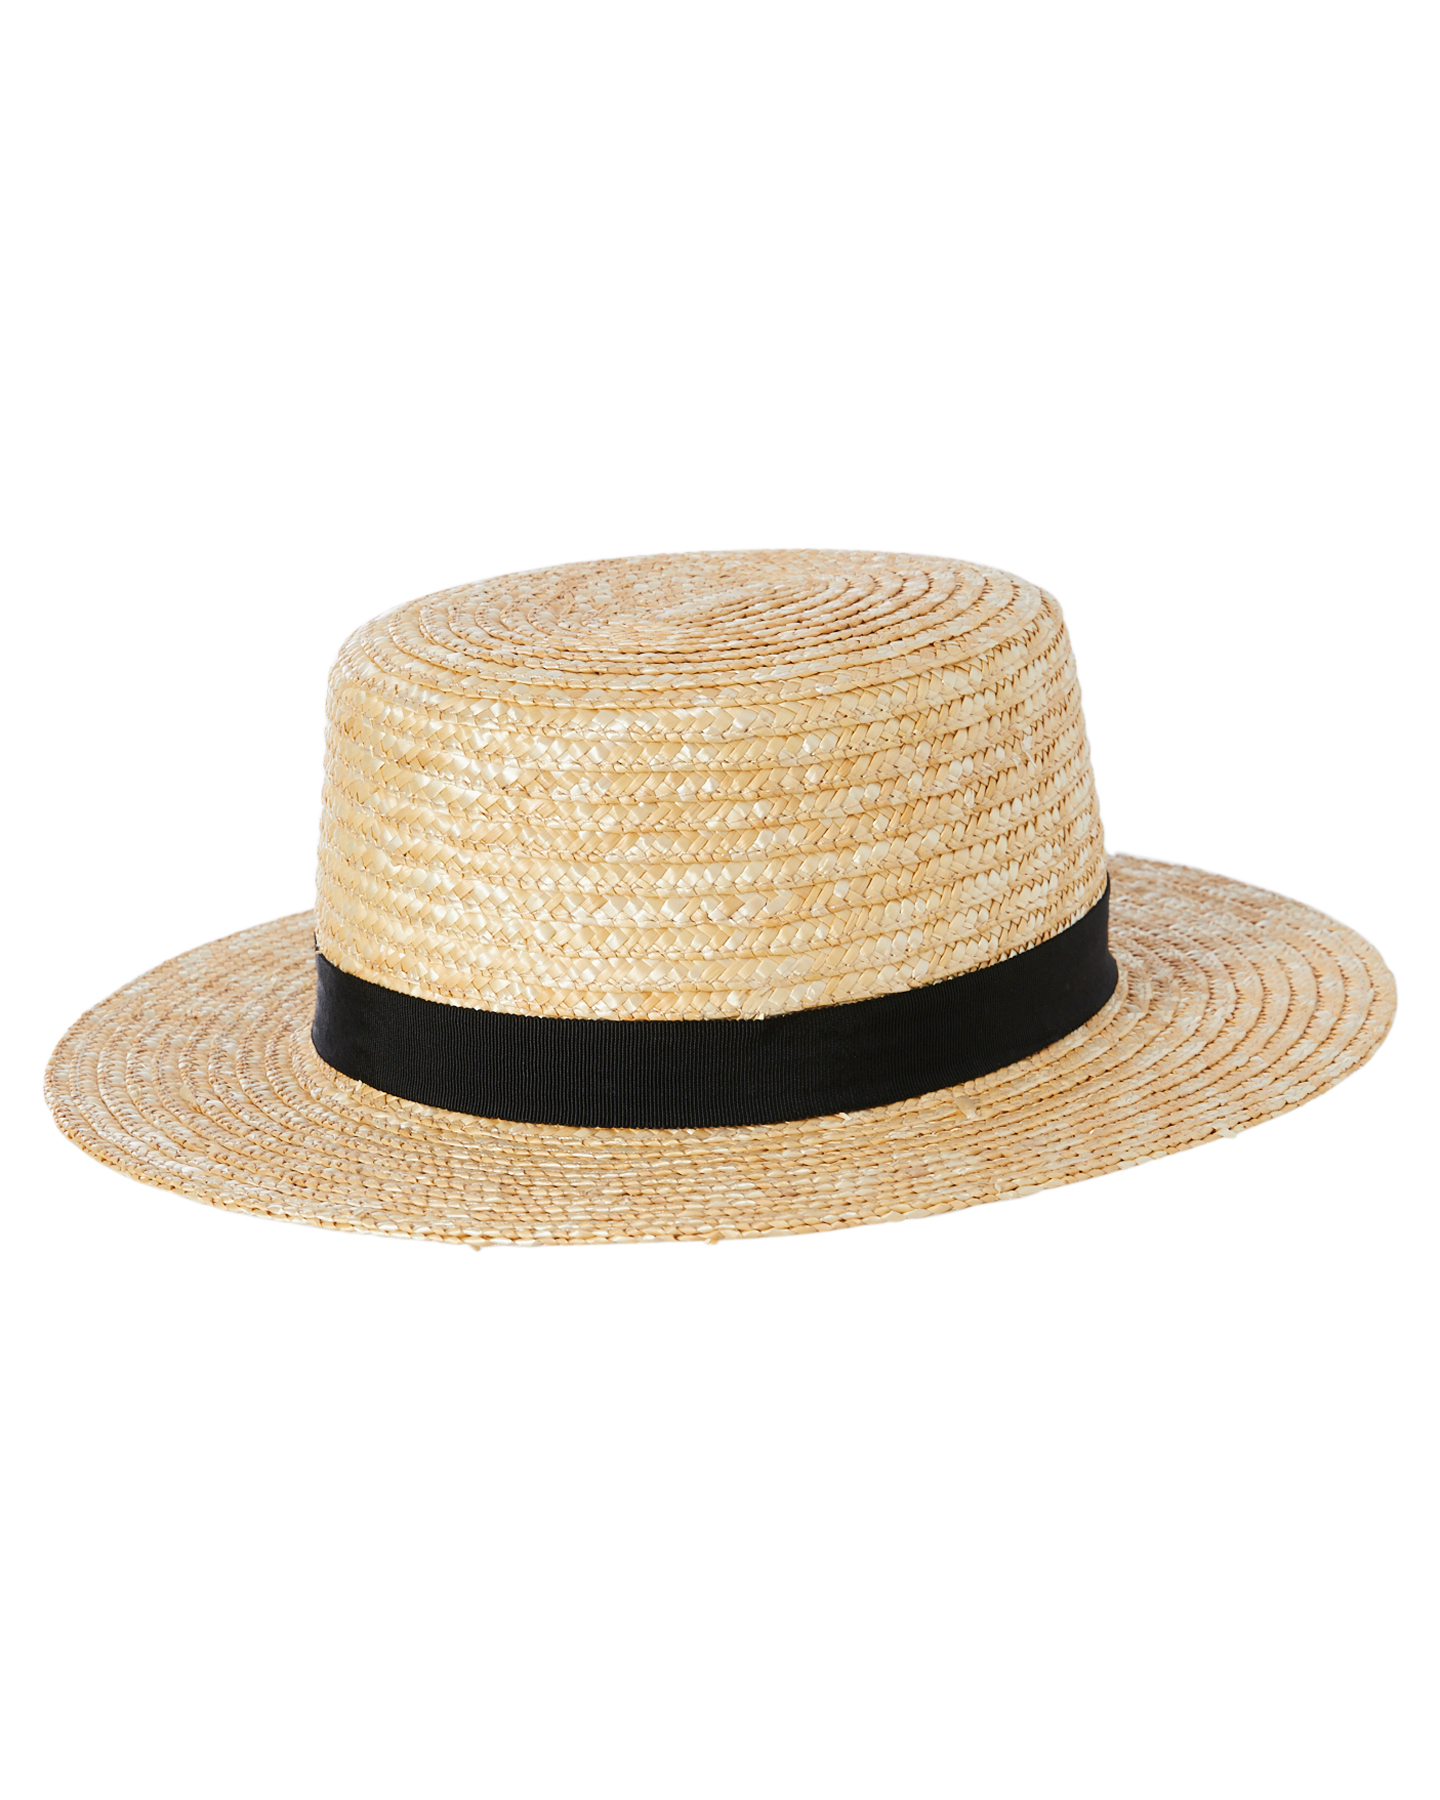 Ace Of Something Thalia Straw Hat - Natural Black | SurfStitch